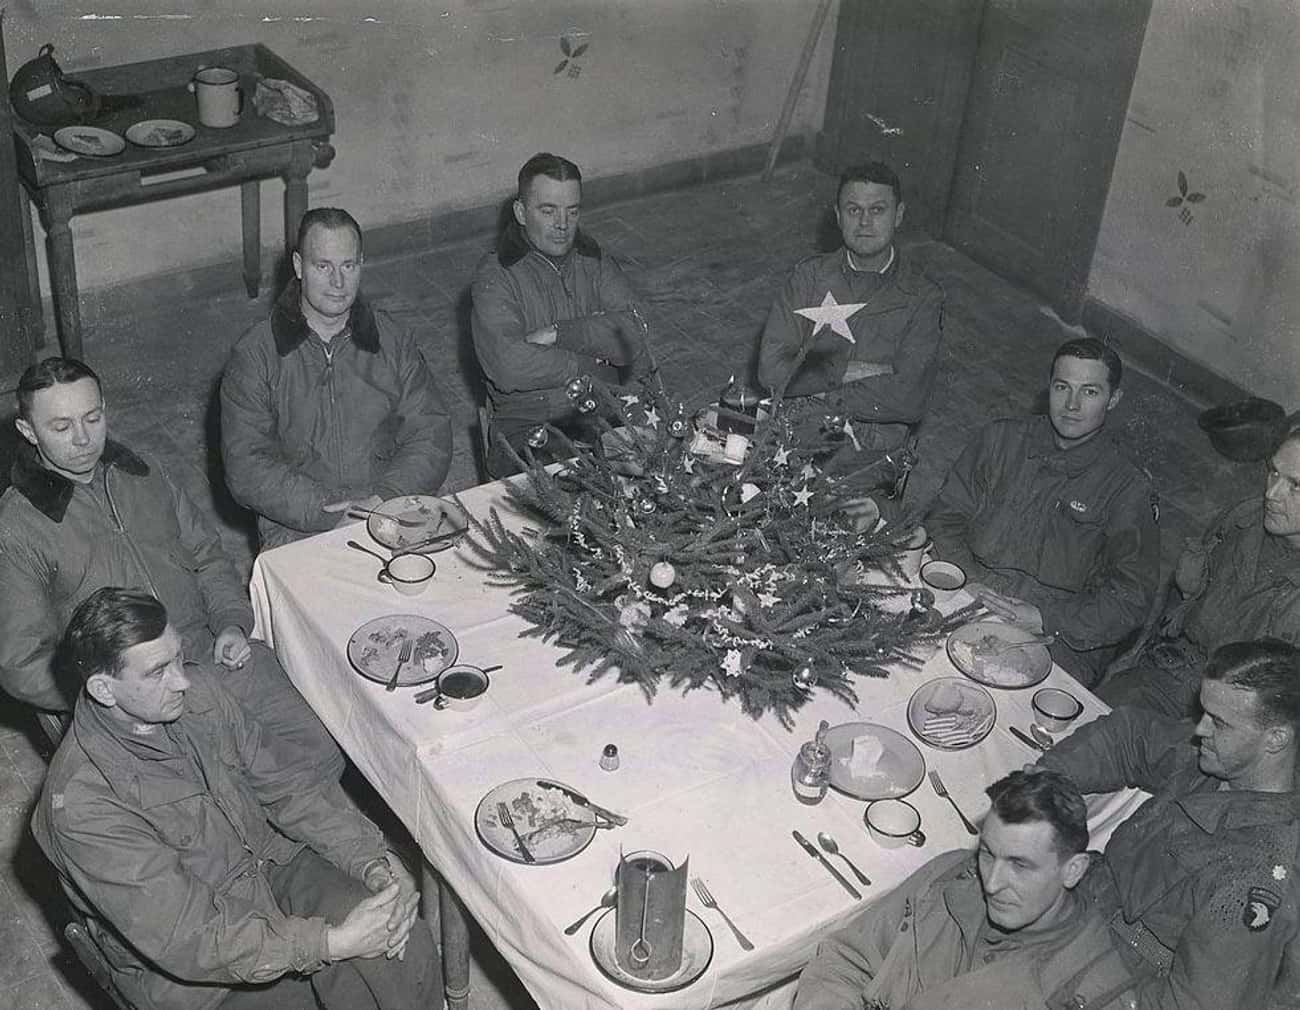 A Civilian Asked German And American Soldiers To Be Polite For A Christmas Meal